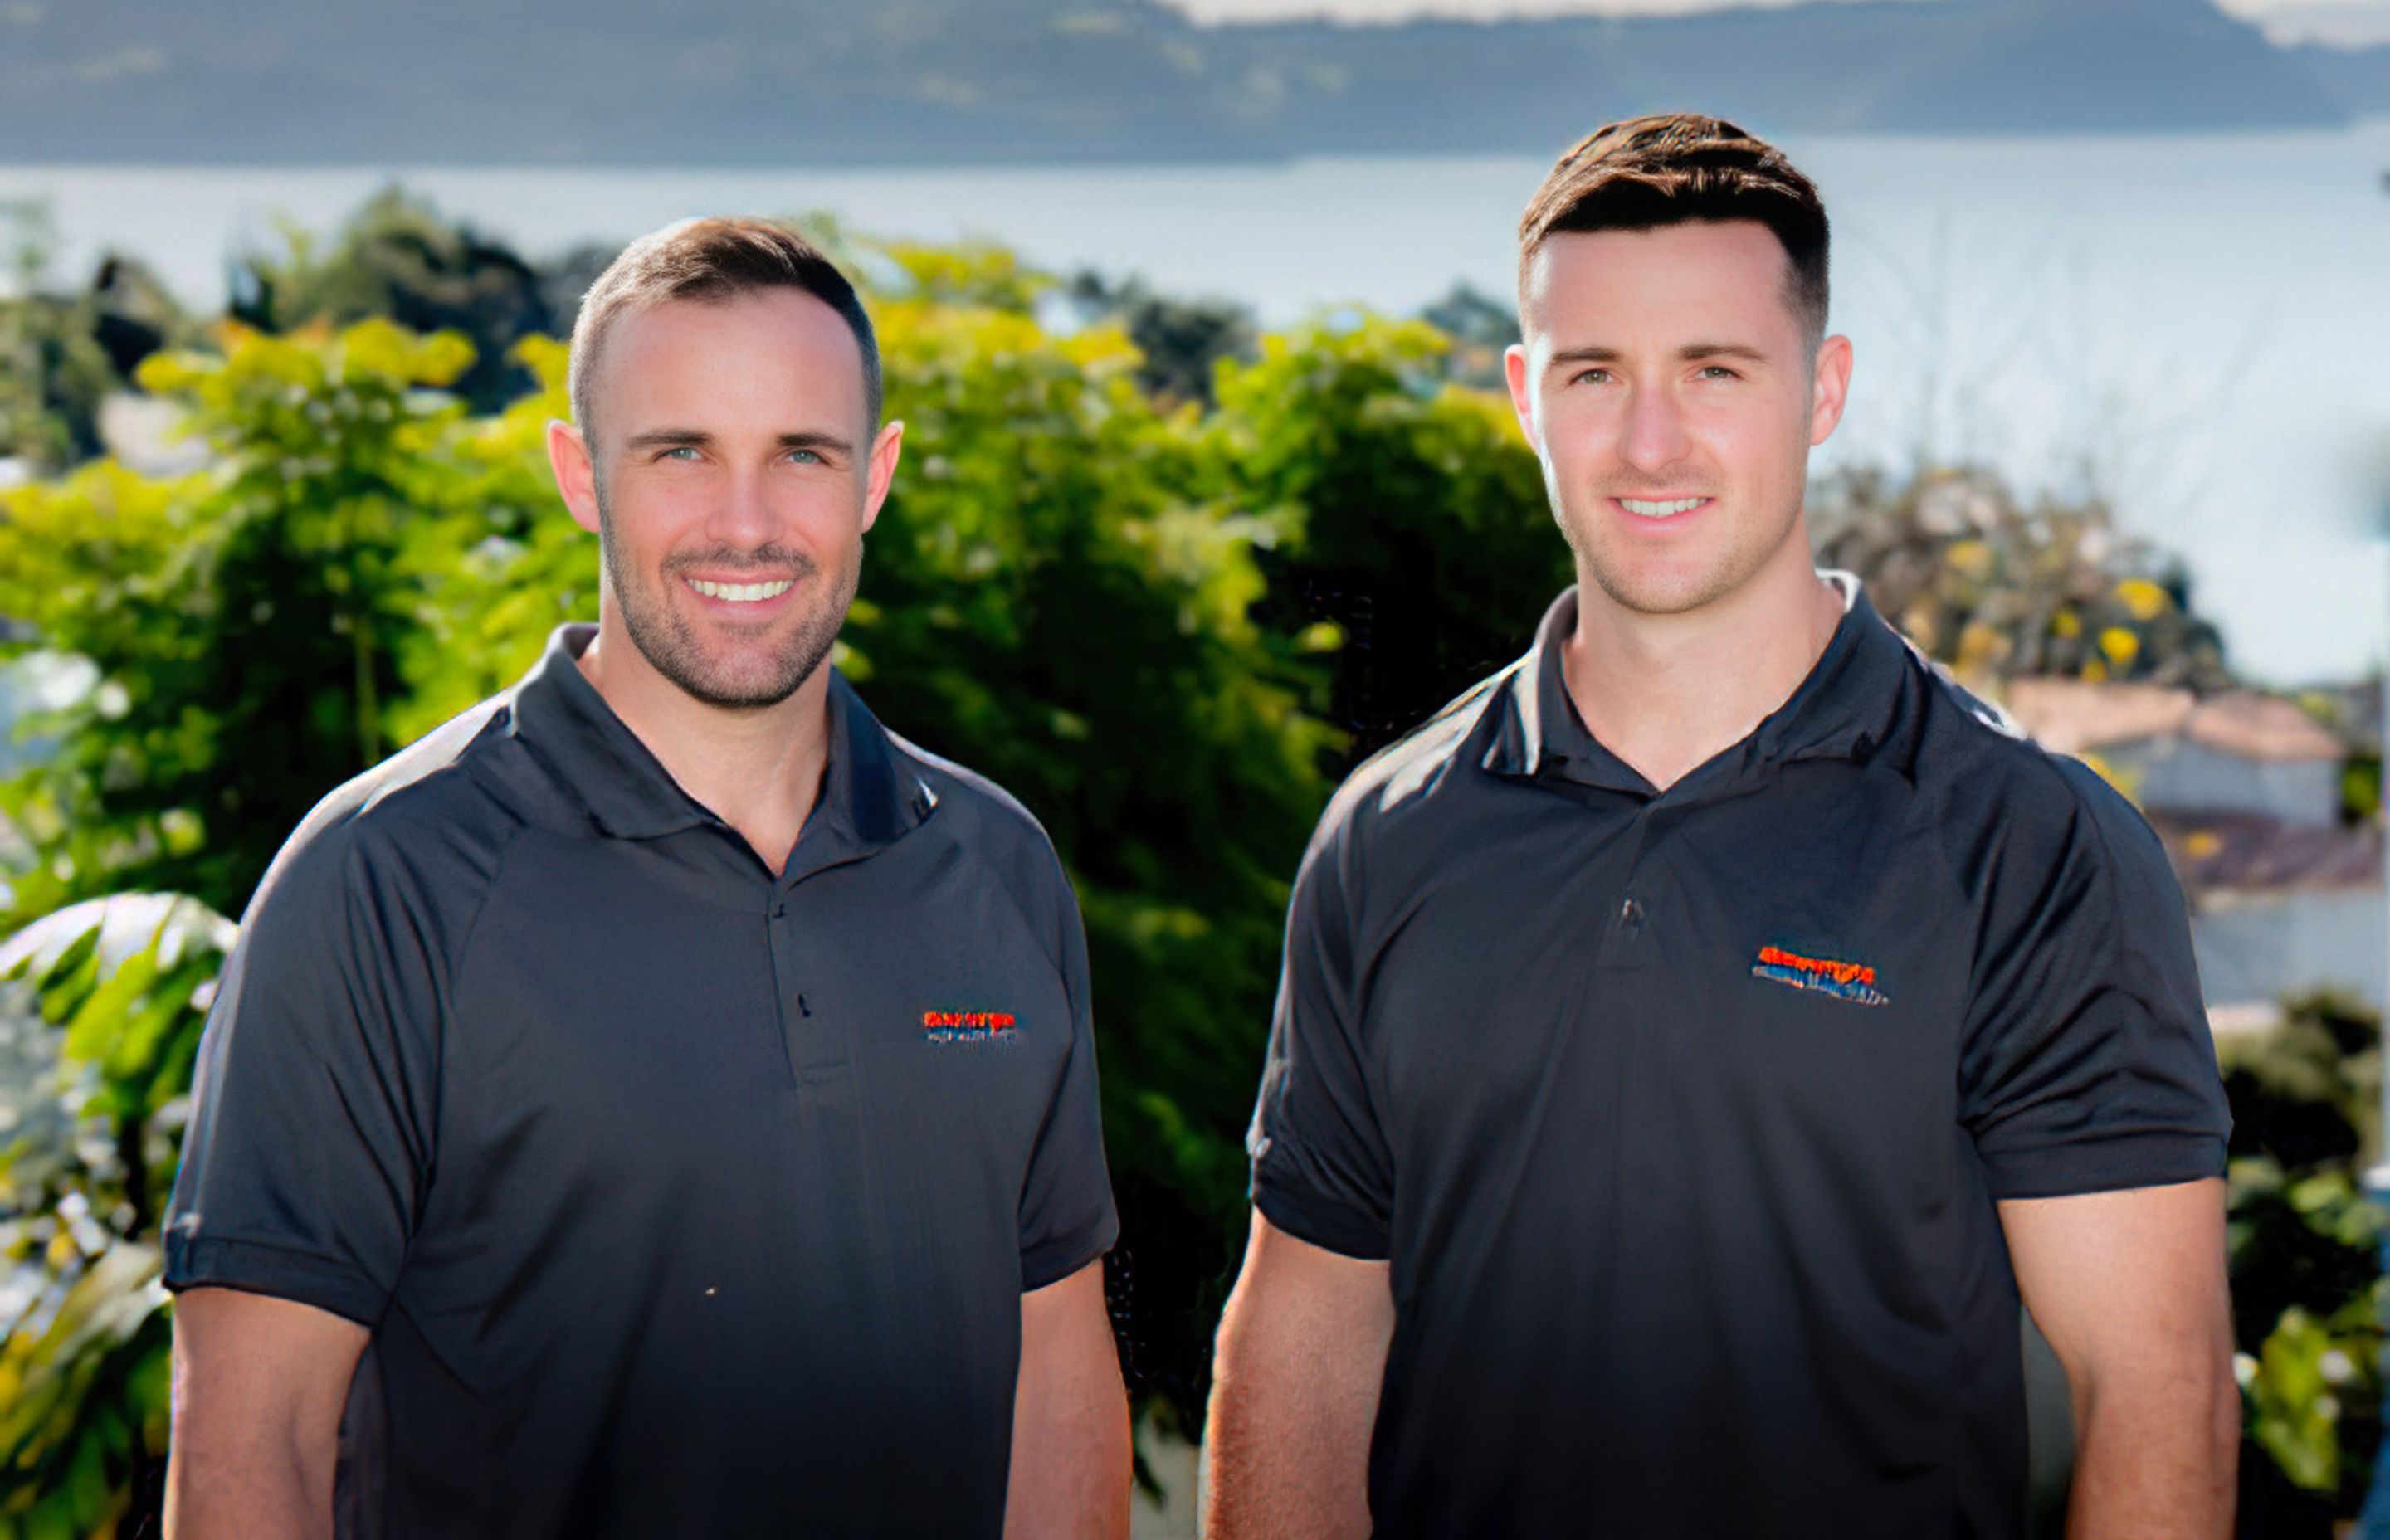 Dan Hawke-Mills (left) and Dillon O'Leary (right) co-own Downright Construction.